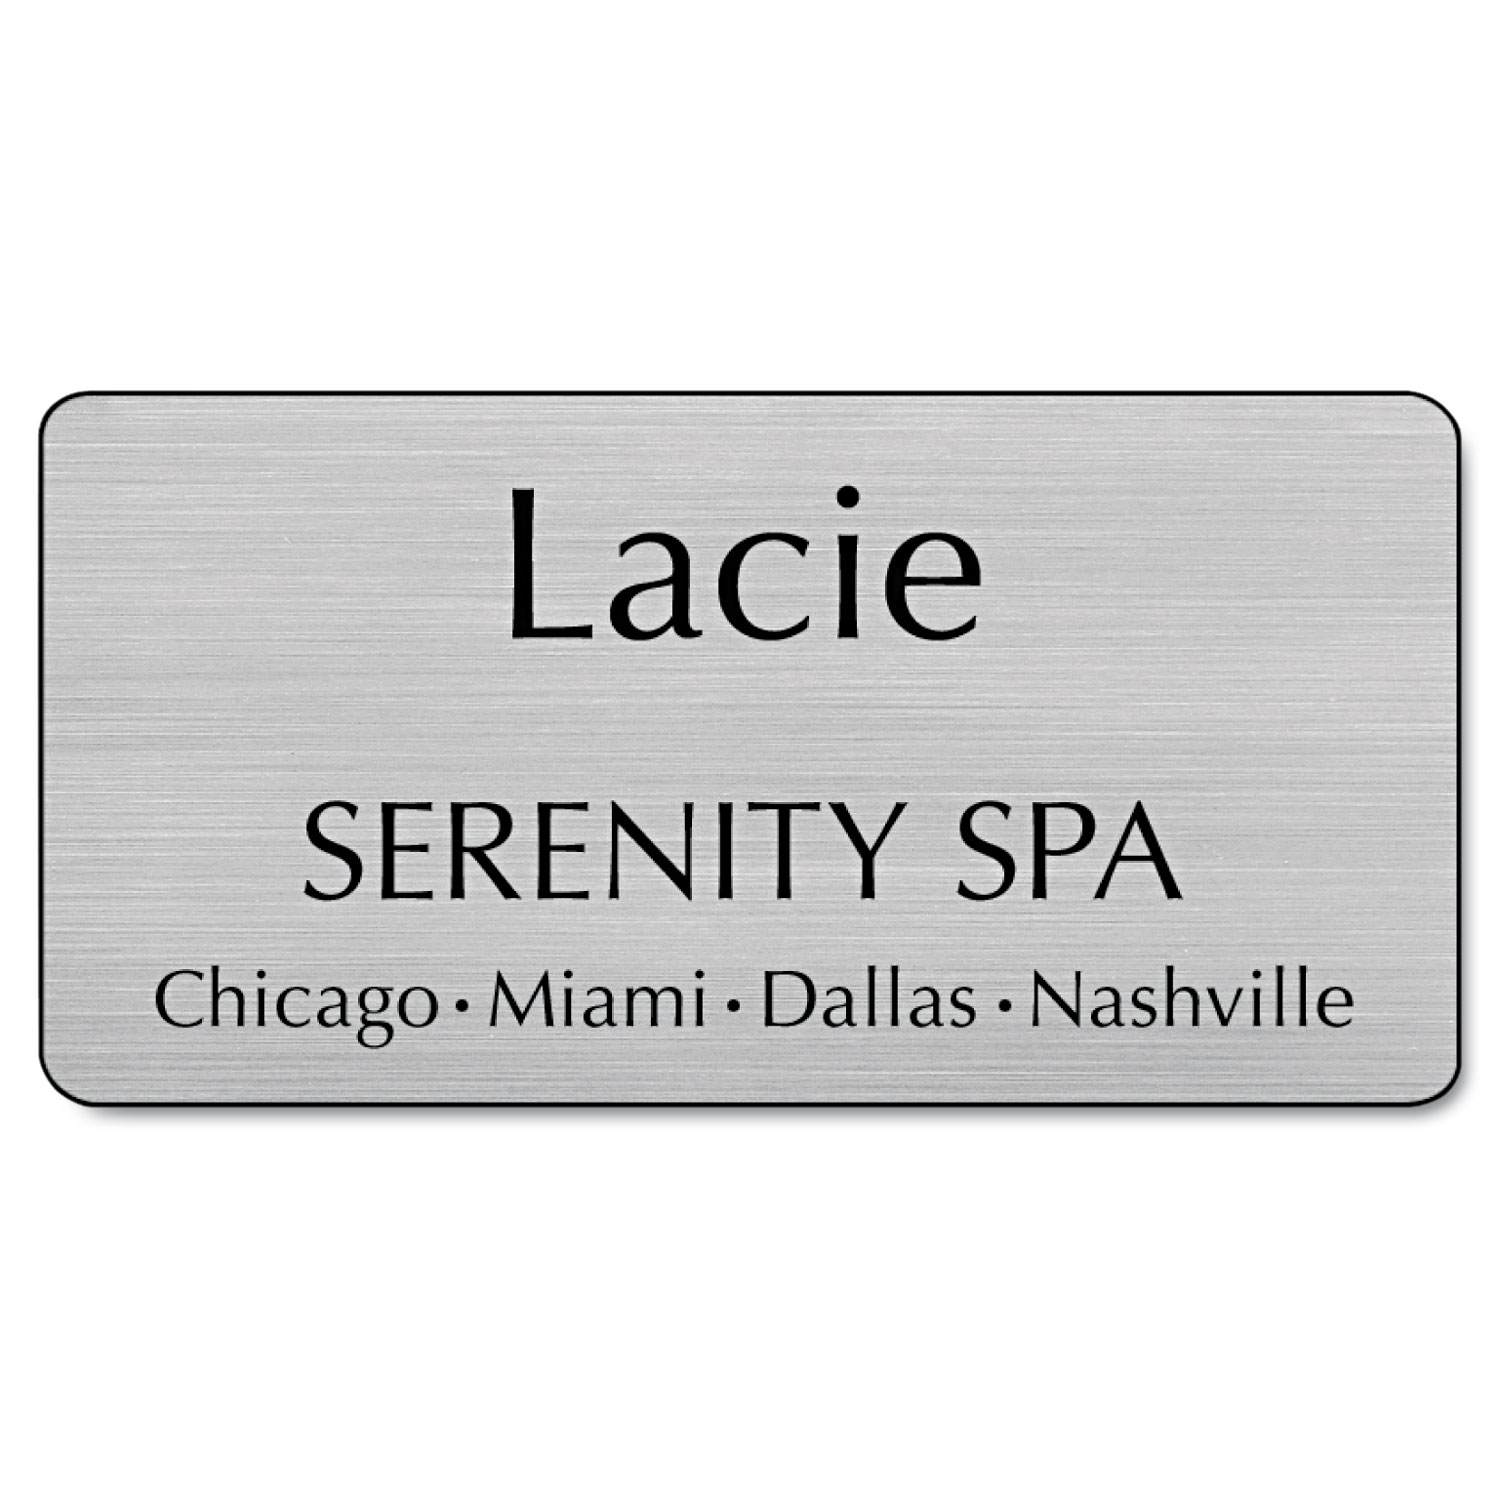  Identity Group 4346M Customized Engraved Name Badge With Magnetic Fastener, 1 1/2 x 3, Assorted (USS4346M) 